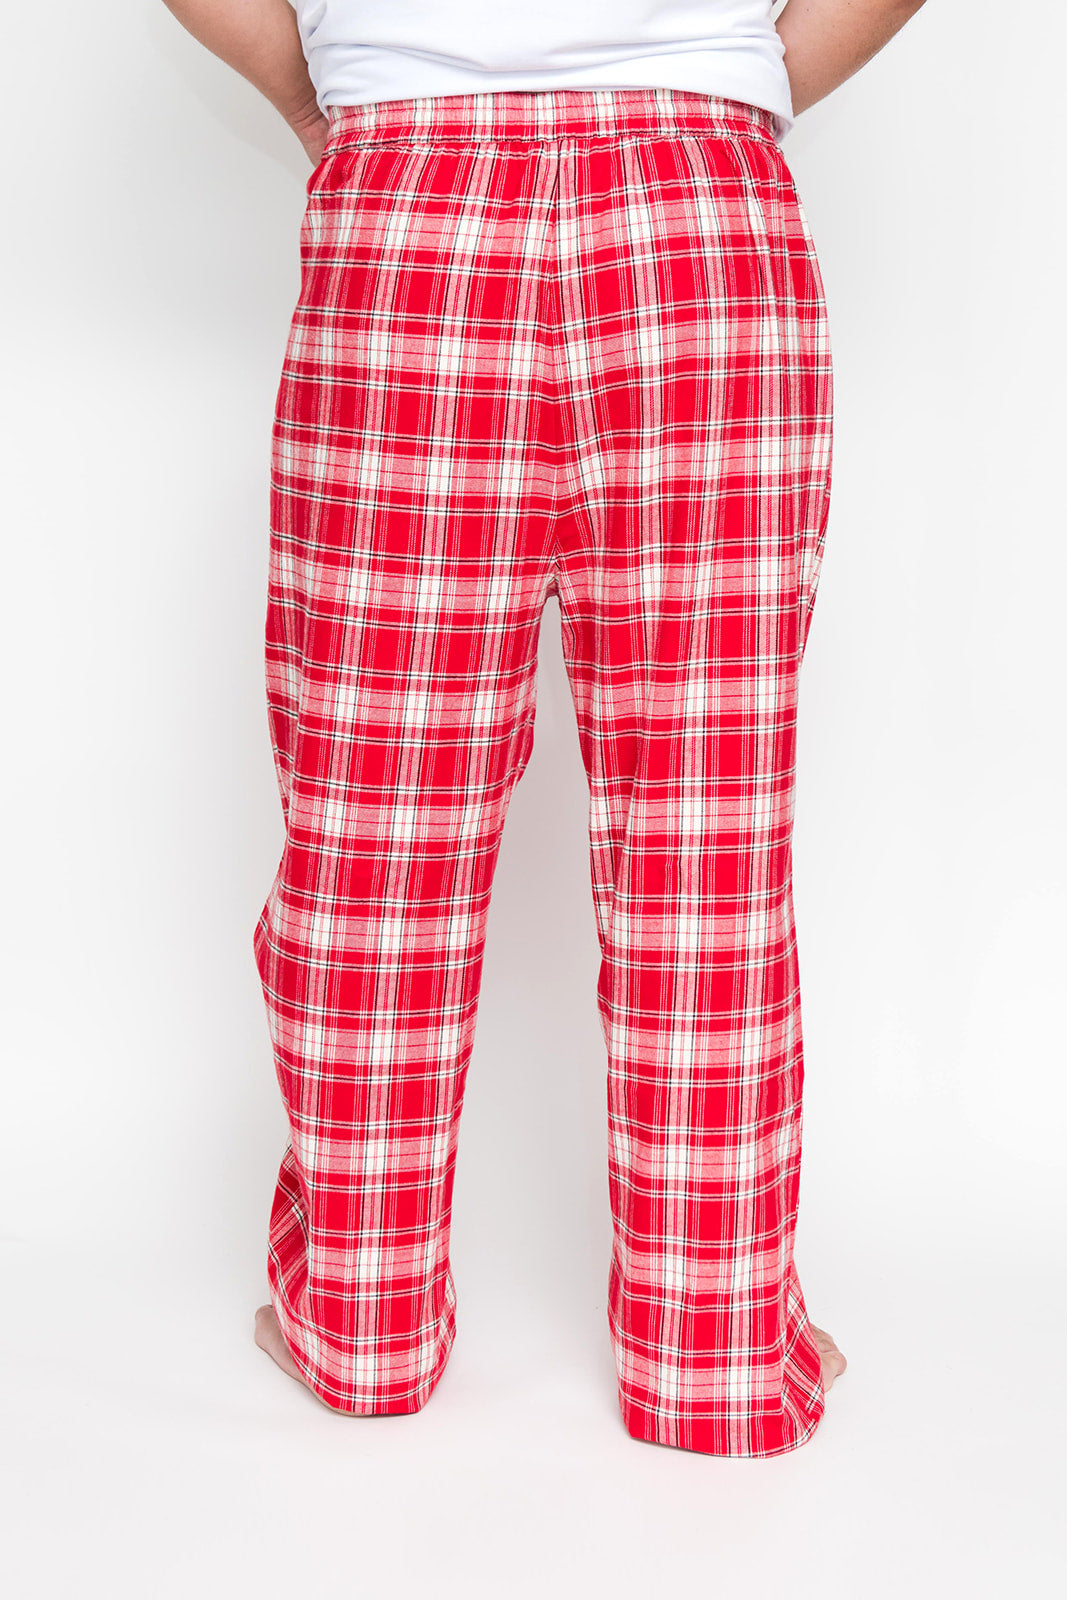 Remy Straight Leg Pant in Red Plaid